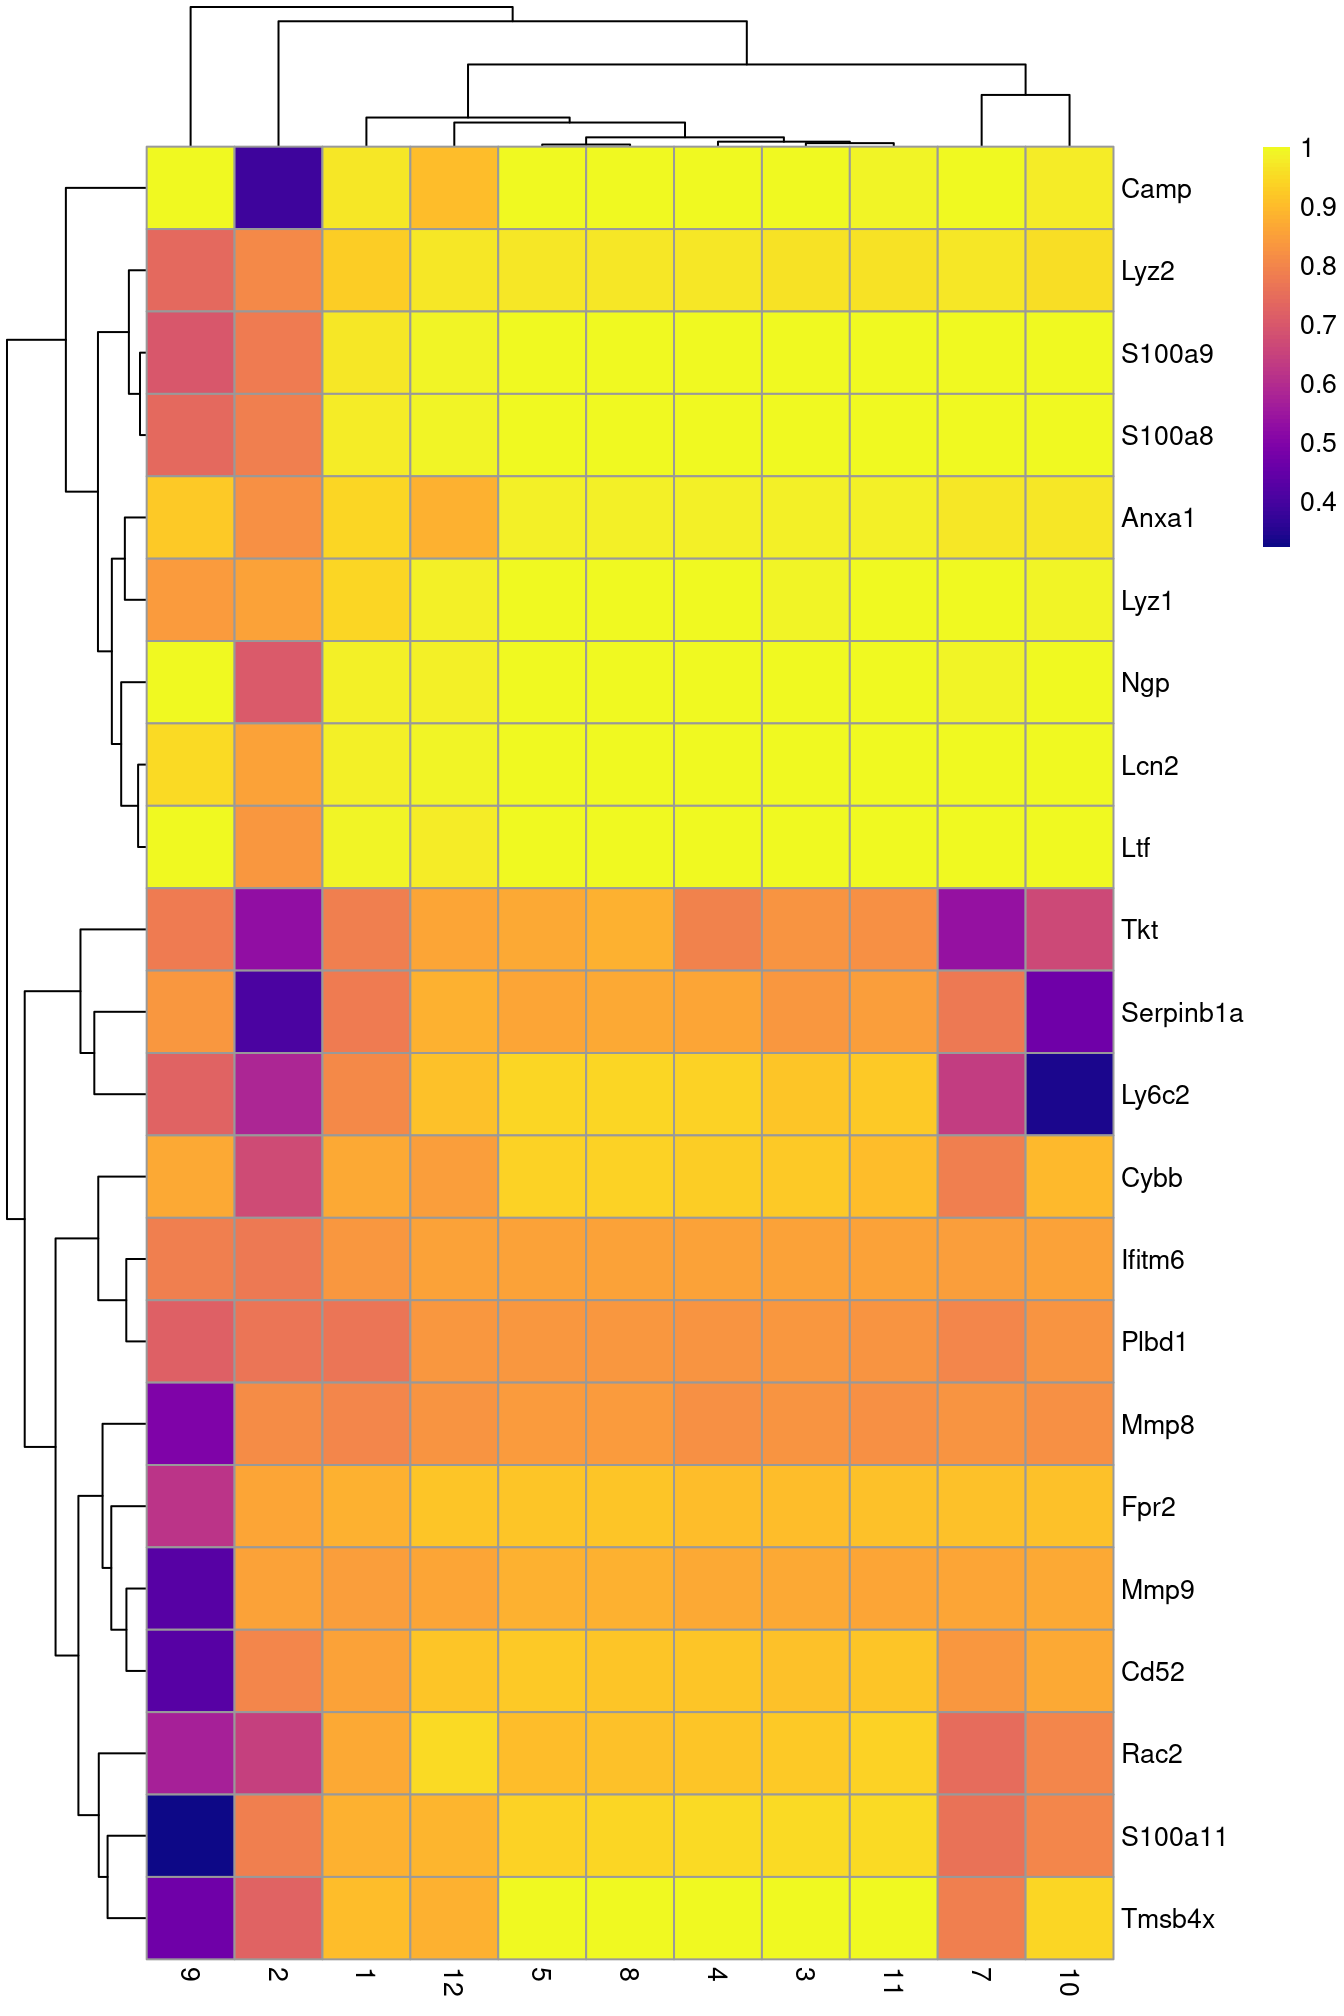 Heatmap of the AUCs for the top marker genes in cluster 6 compared to all other clusters in the Grun HSC dataset.